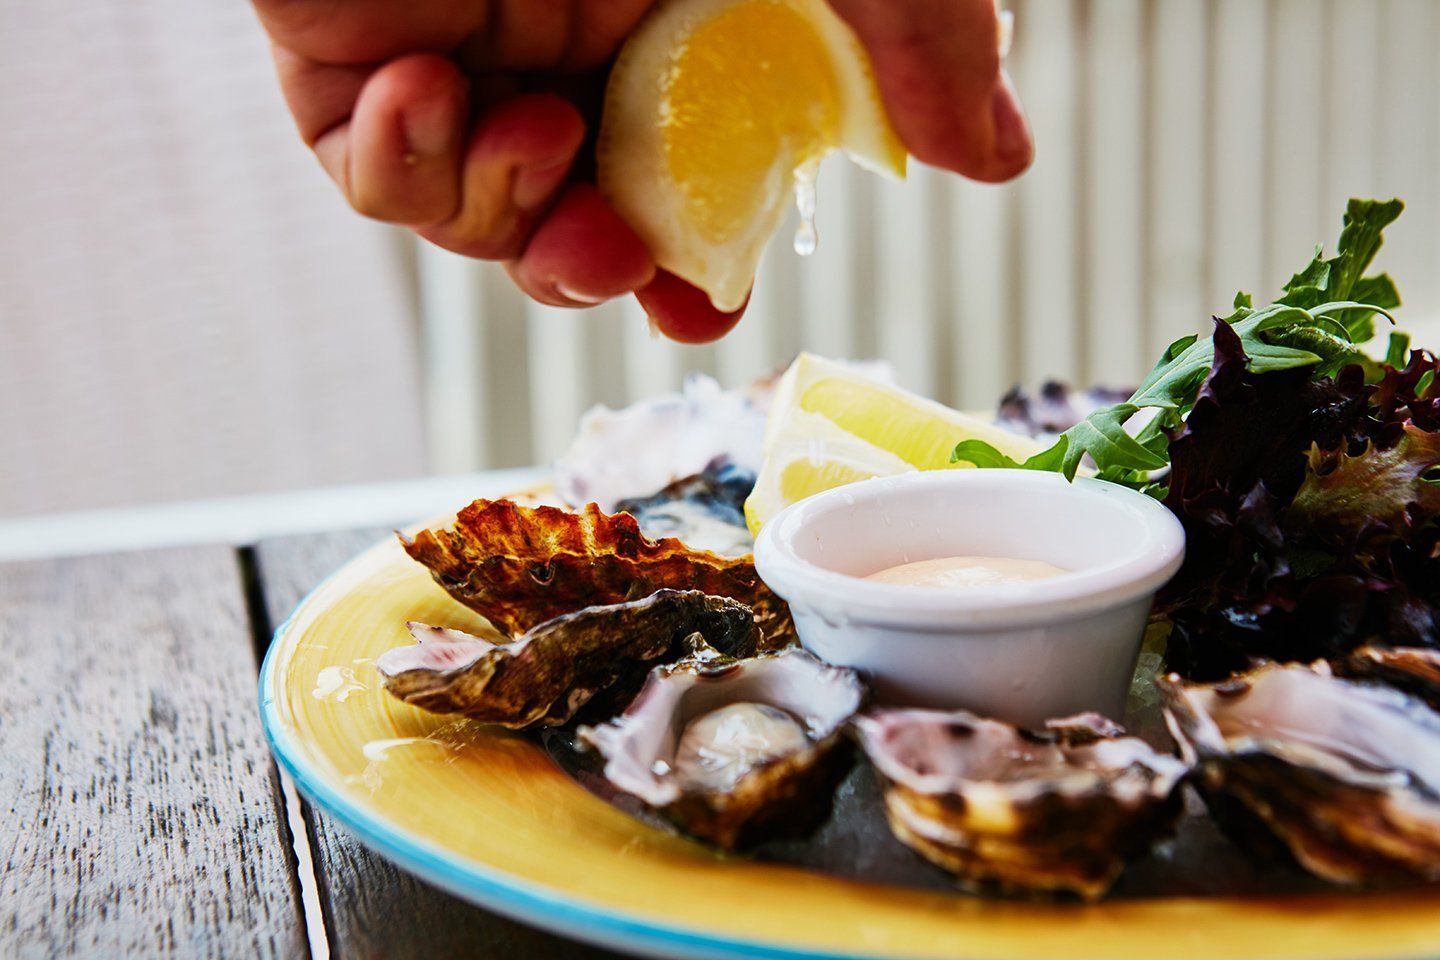 A person is squeezing a lemon over a plate of oysters.